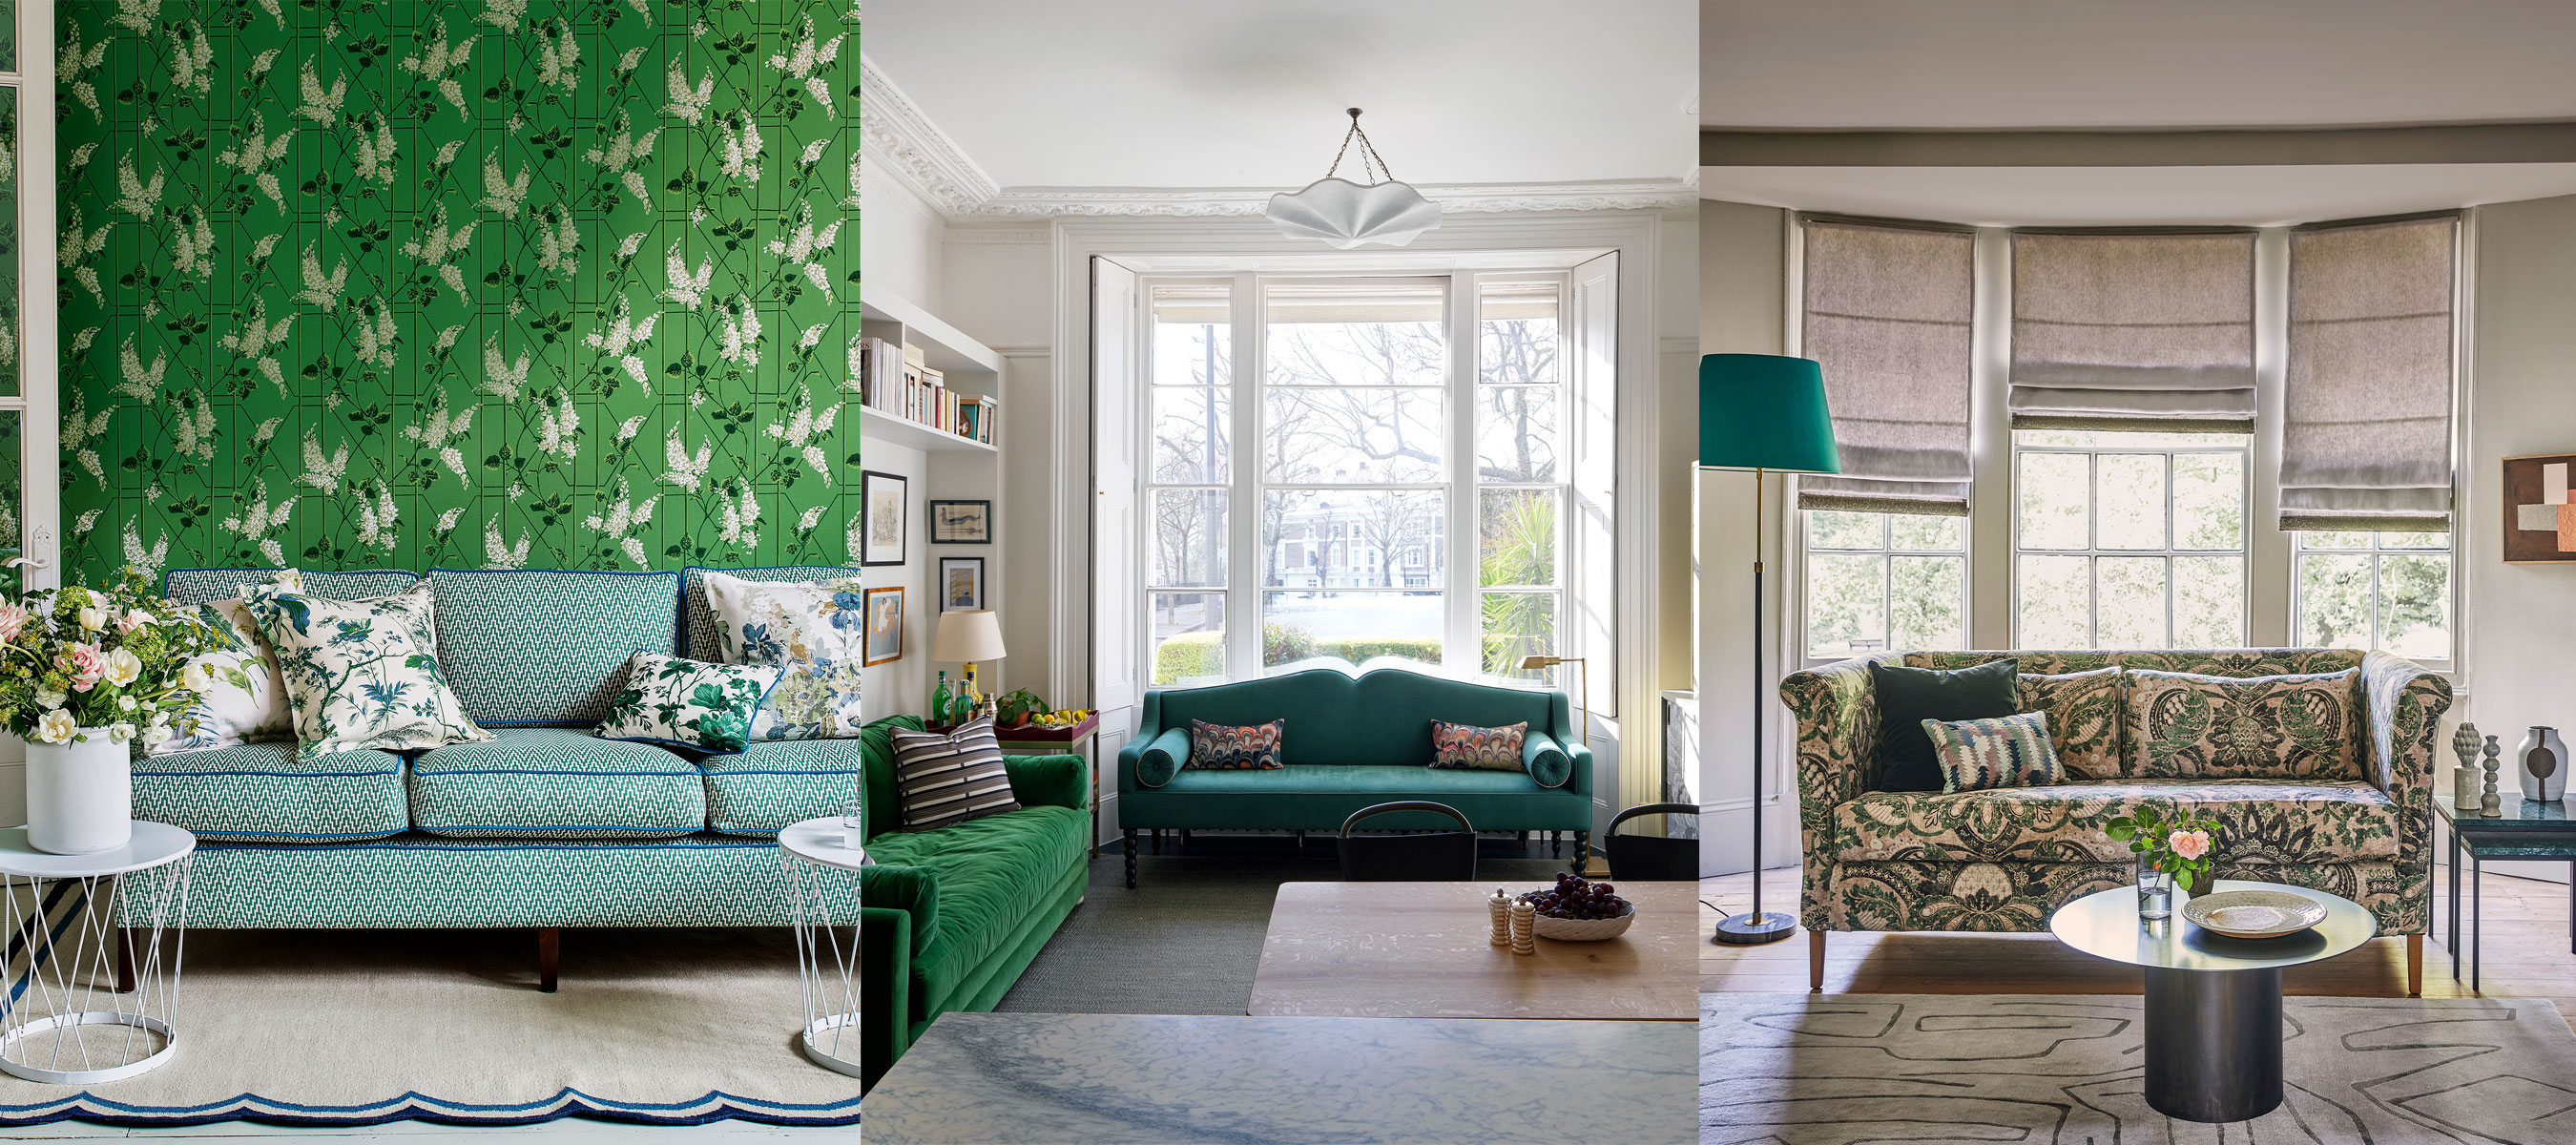 green couch living room ideas: ways to complement gorgeous seating |